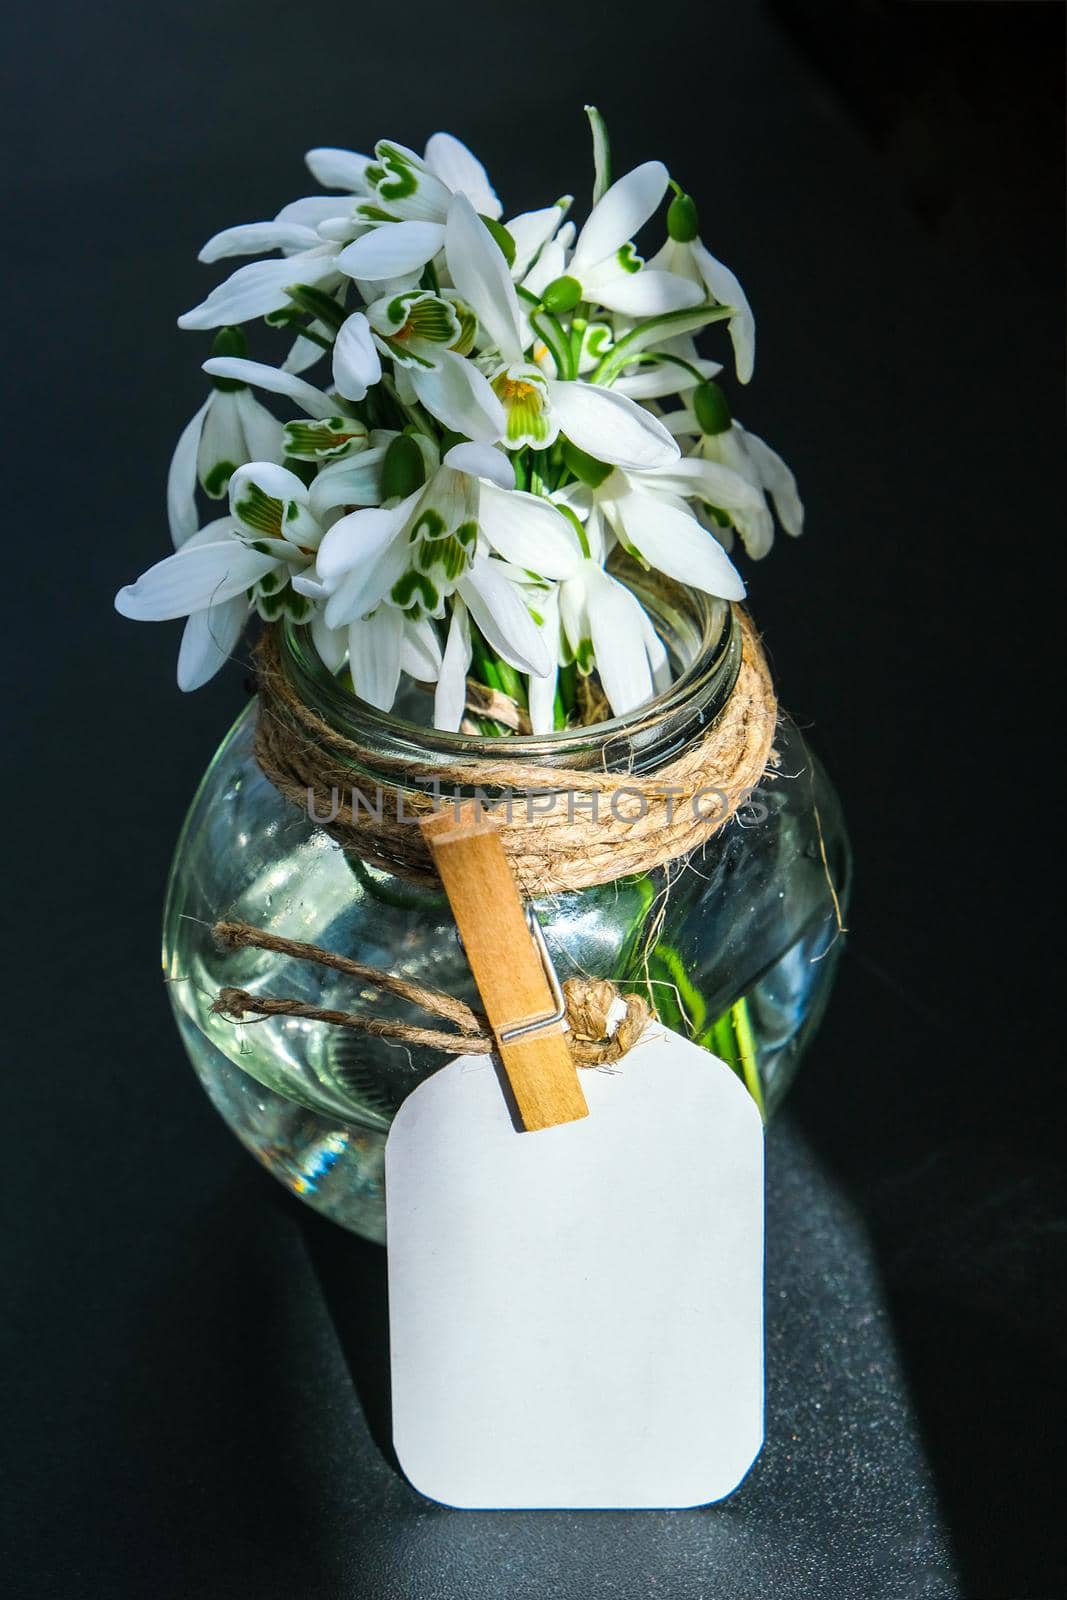 Bouquet of snowdrops in a glass vase with water. Copy space for text. Mock up with a tag. Early spring flowers. Holiday greeting card